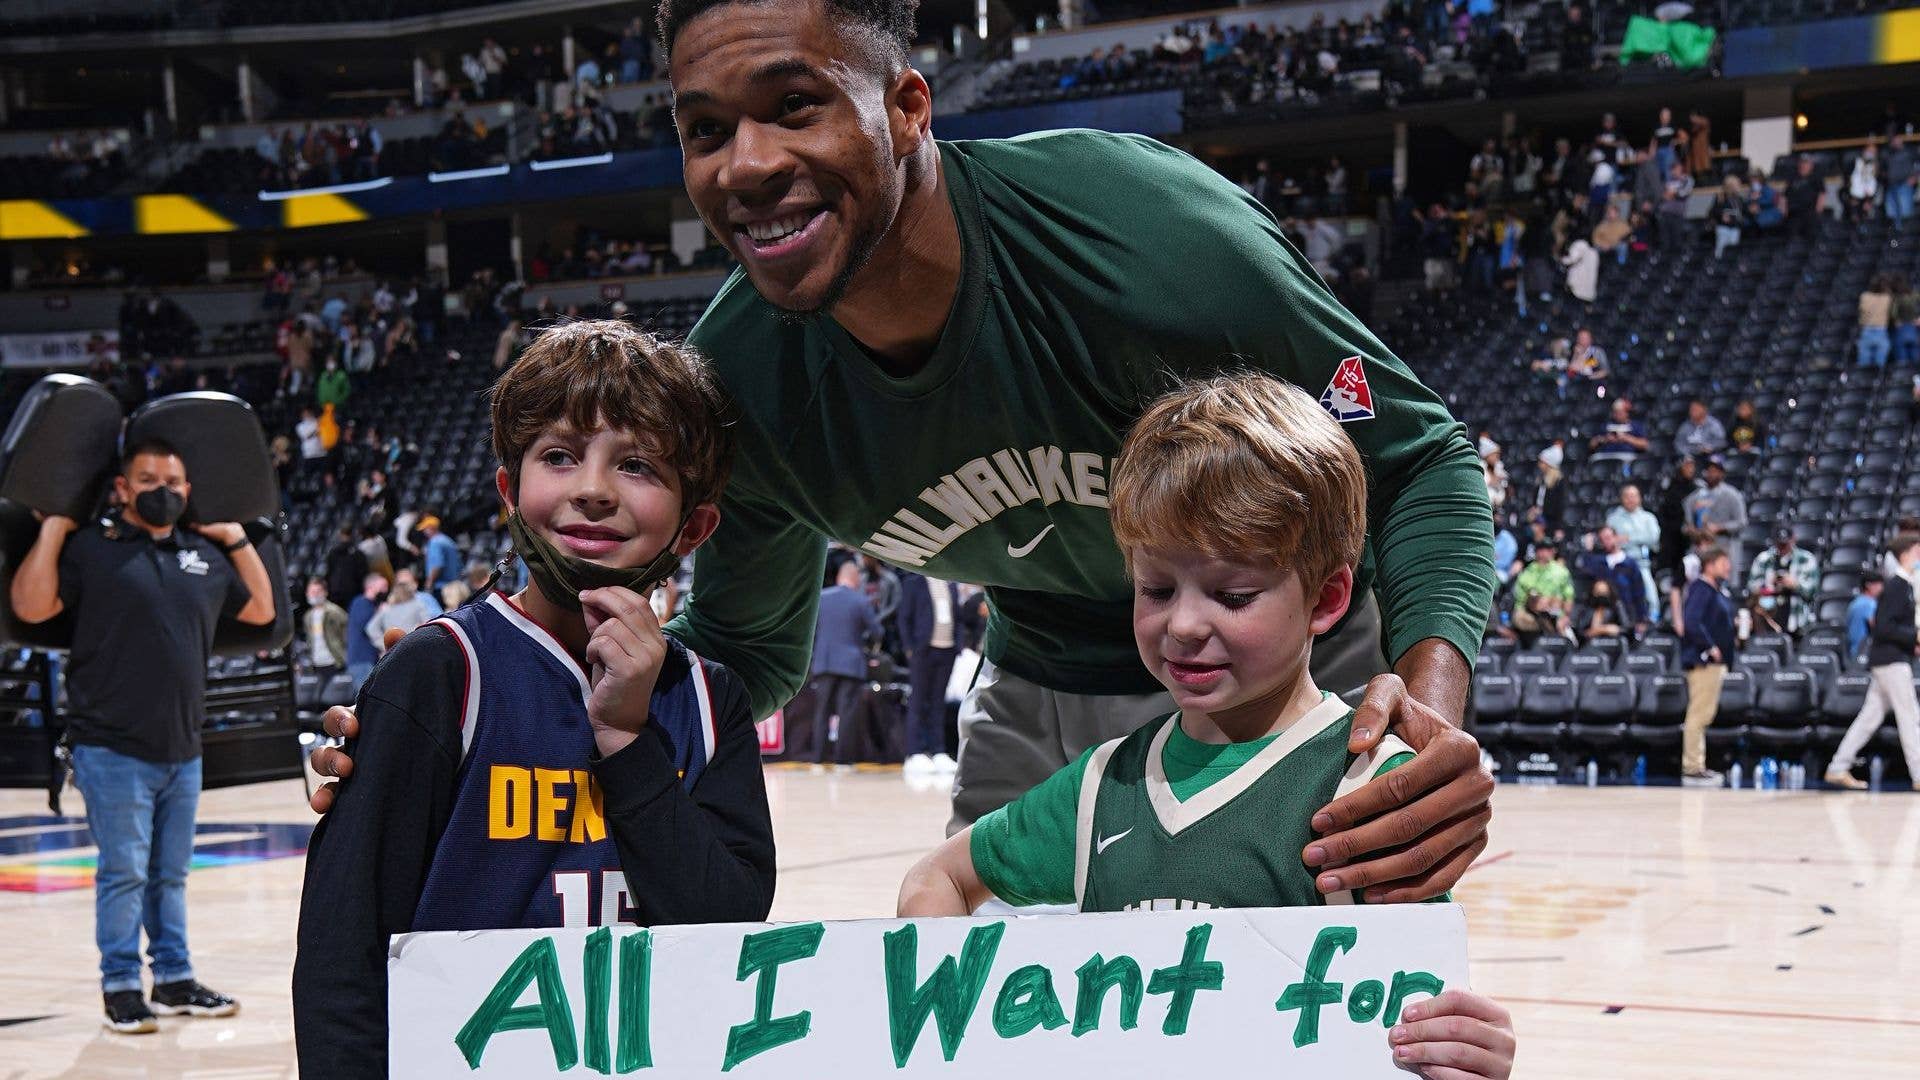 Giannis Antetokounmpo gives his autographed sneakers to a young fan after a game against the Denver Nuggets